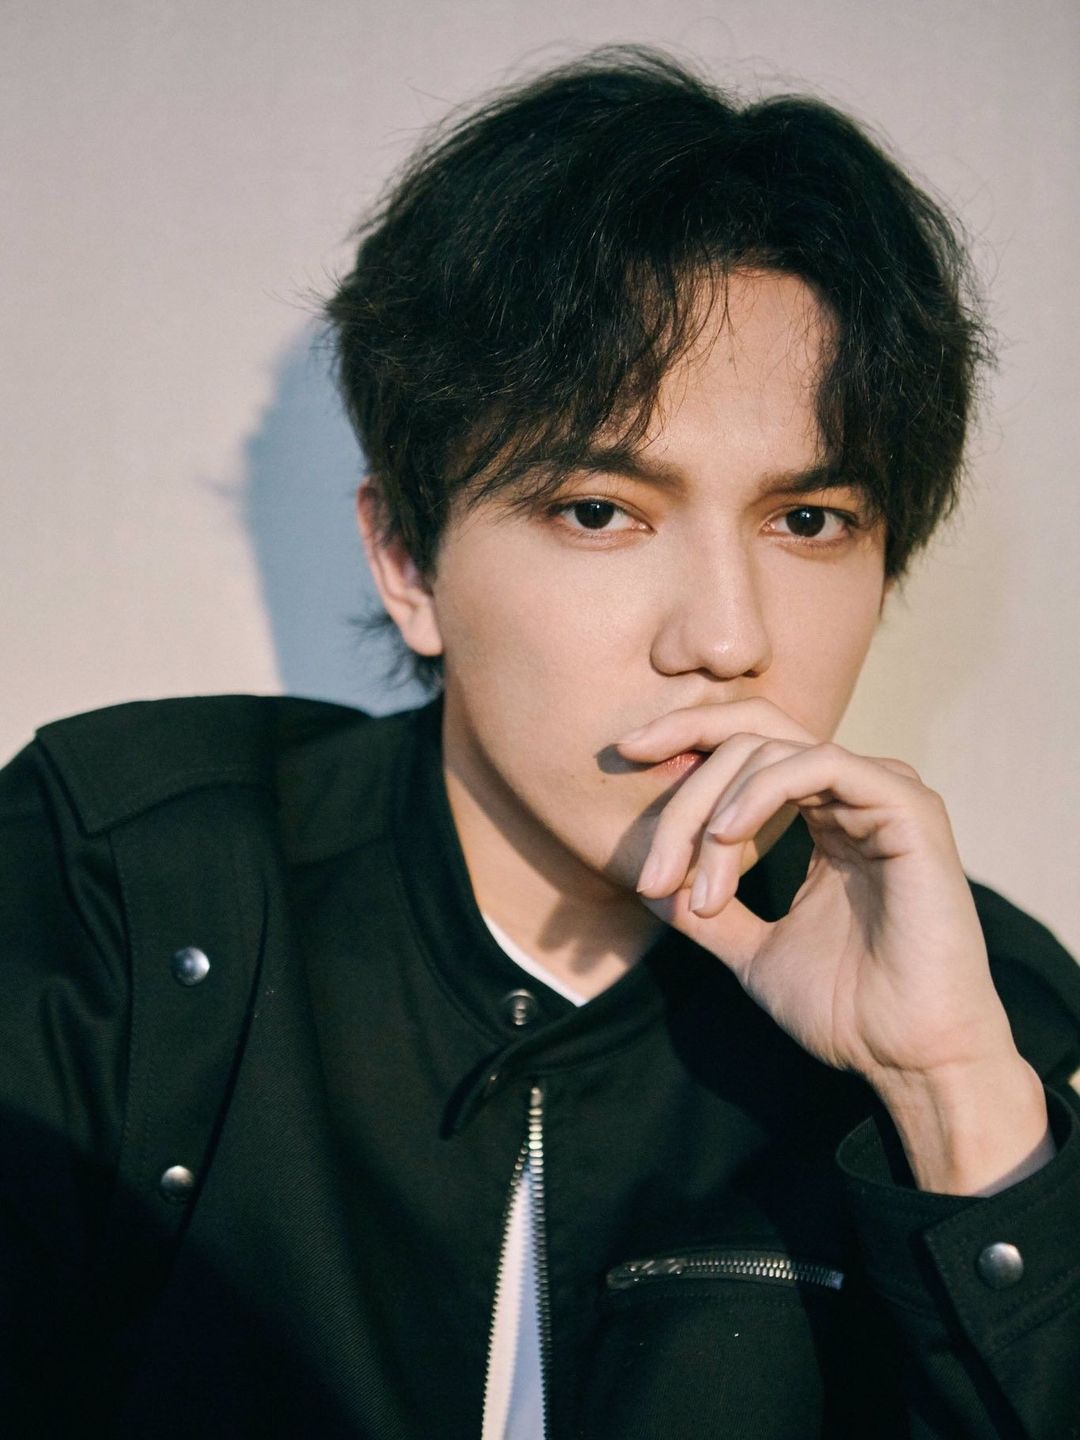 Dimash Kudaibergen who is his father